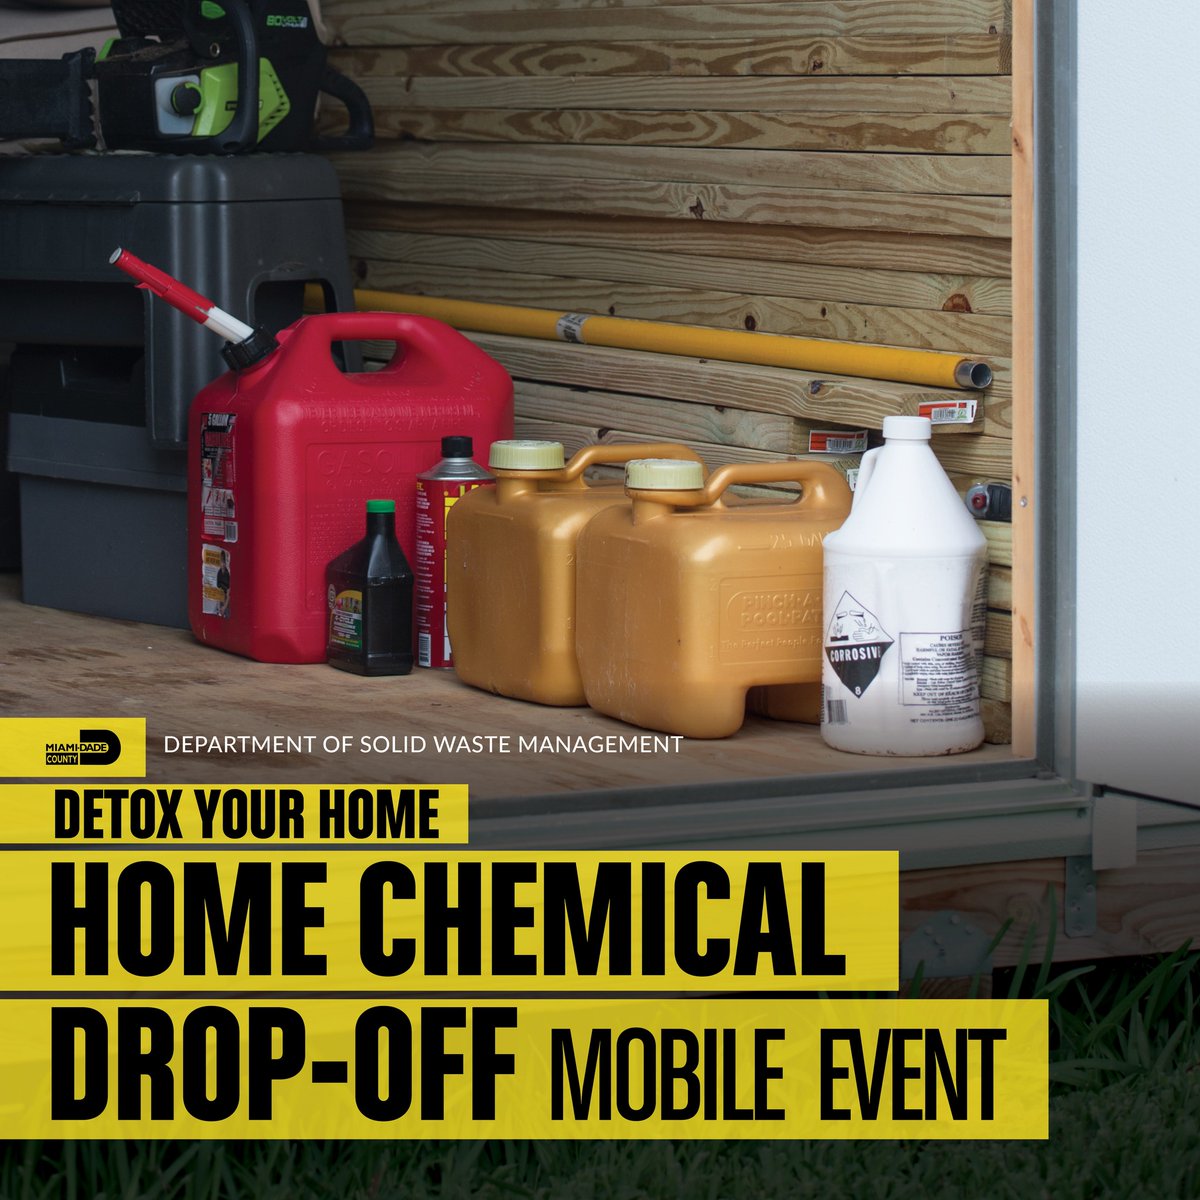 Don't miss out on our Mobile Home Chemical Event this morning starting at 8 a.m. You can bring your household chemical items and old electronics to our Sunset Kendall TRC. For more information visit the link in our bio. #DetoxYourHome